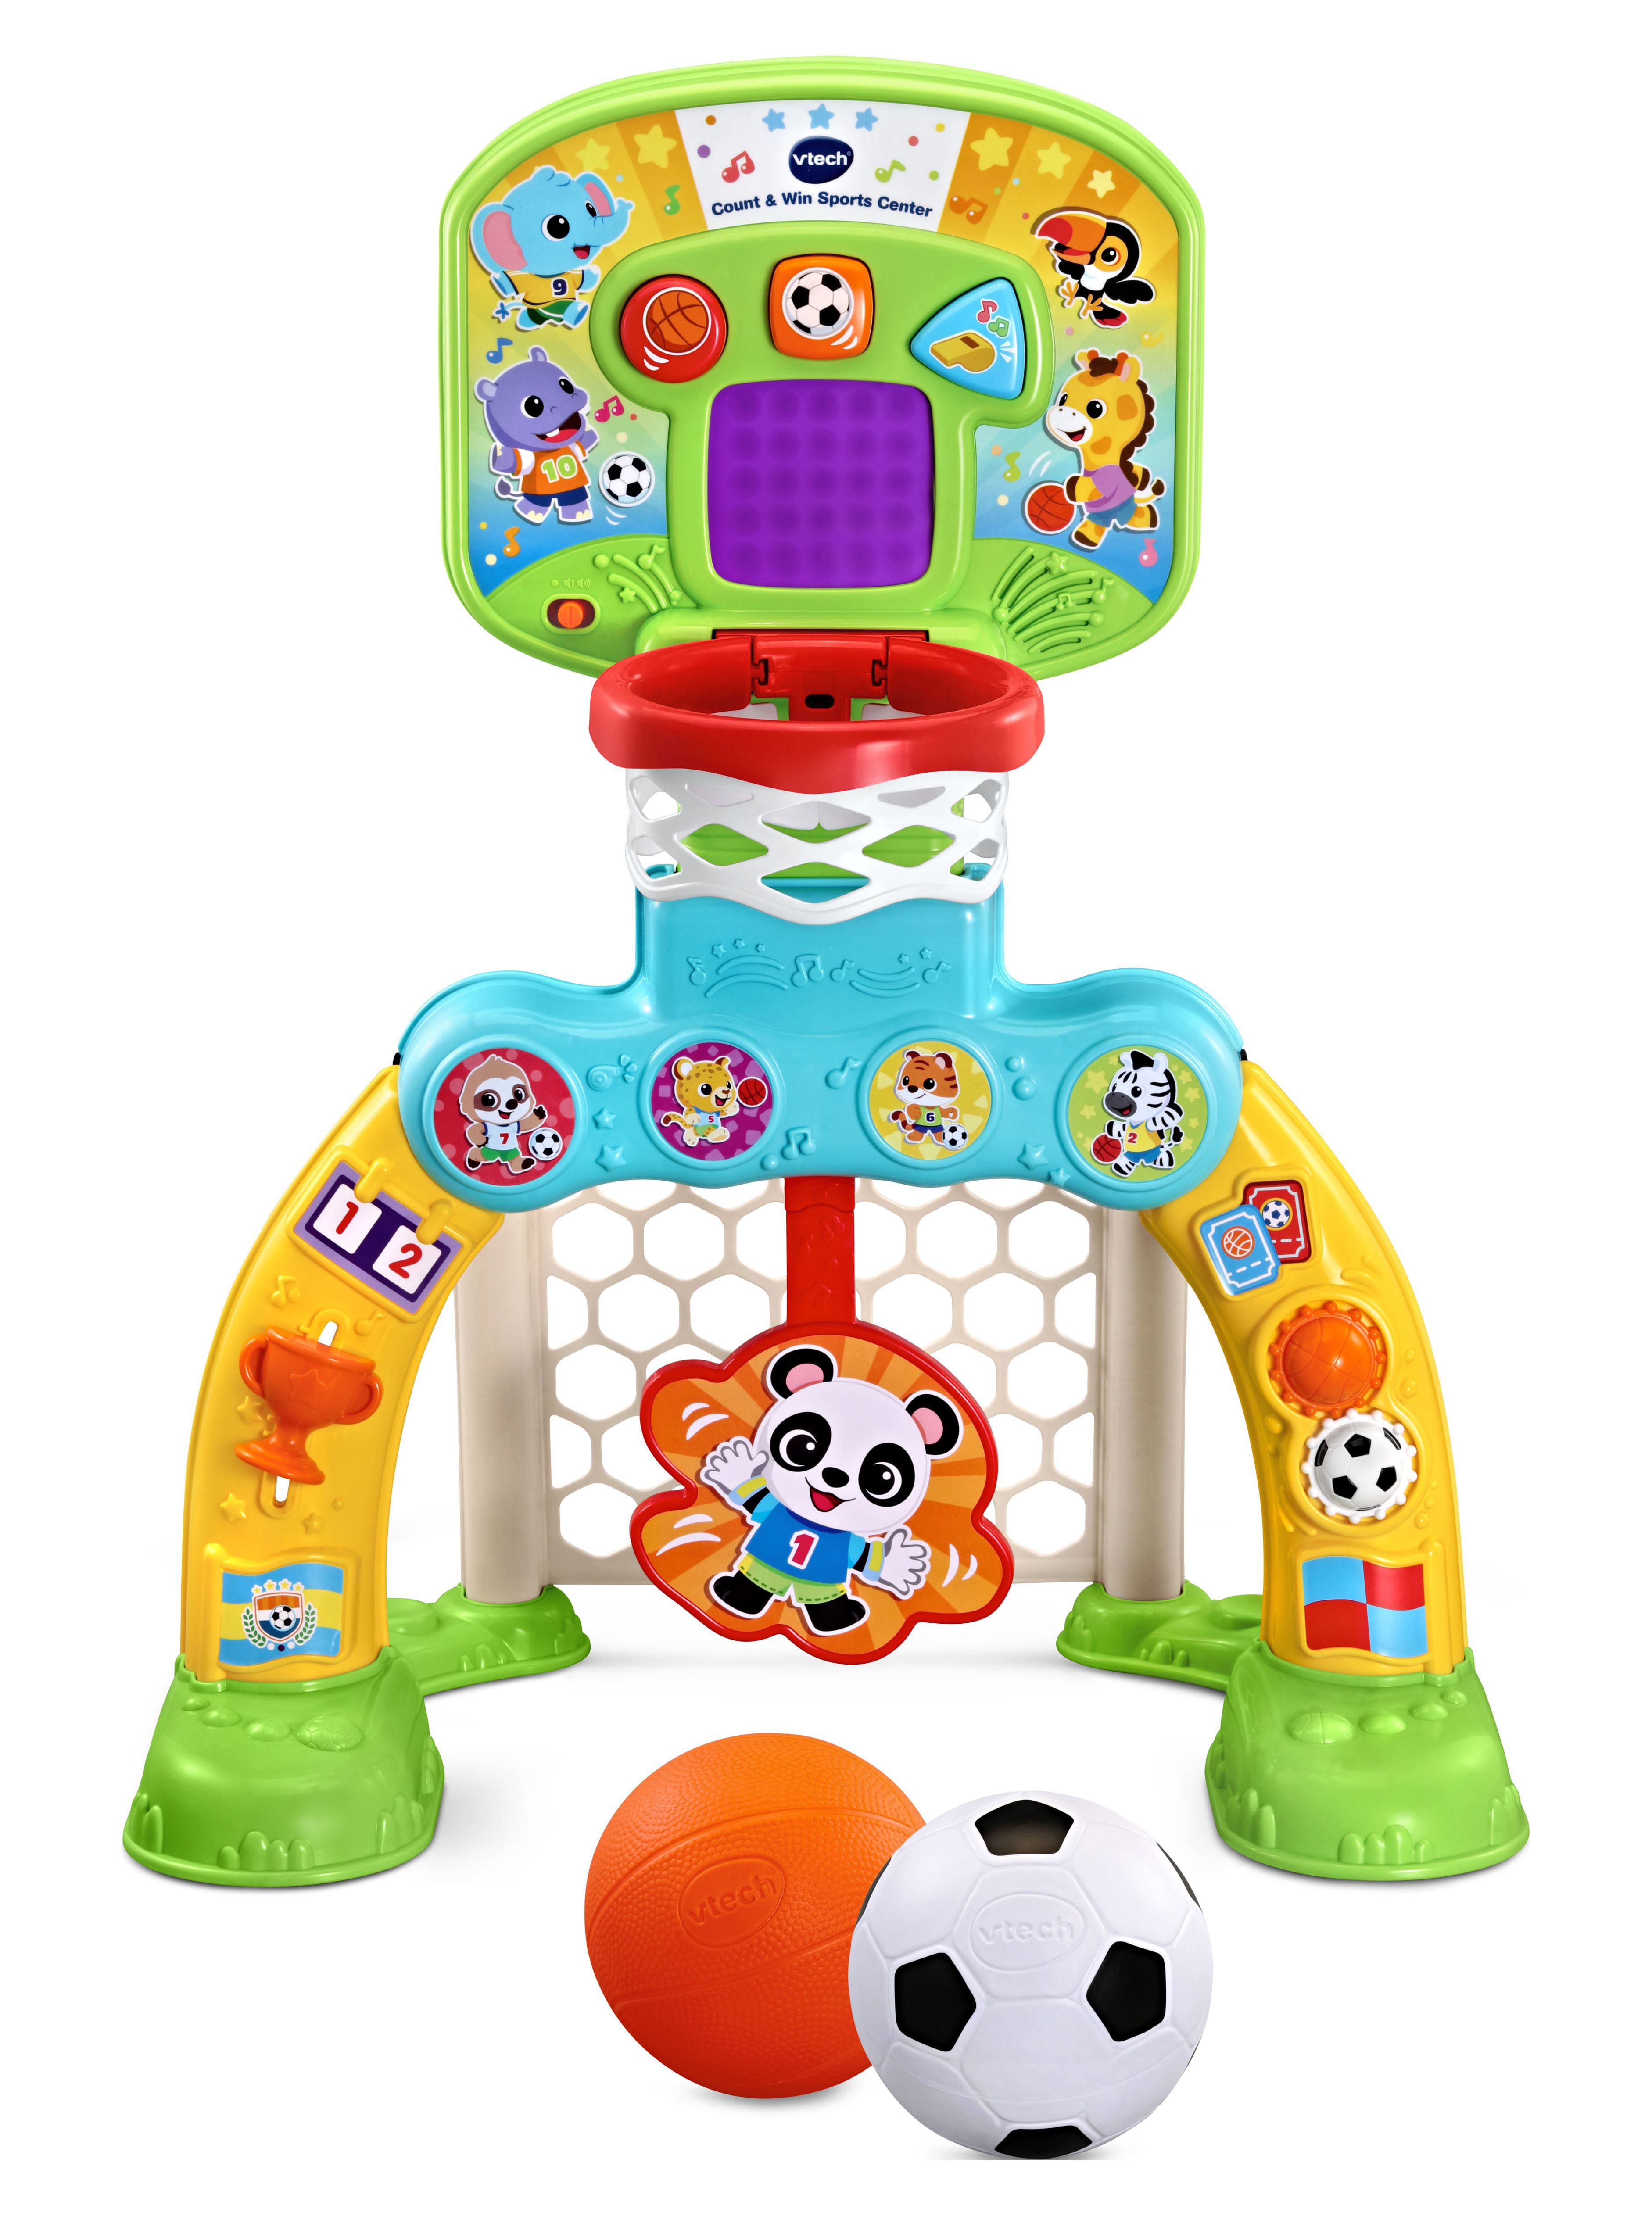 VTech Count & Win Sports Center, Basketball and Soccer Toy for Toddlers, Teaches Physical Activity - image 11 of 13